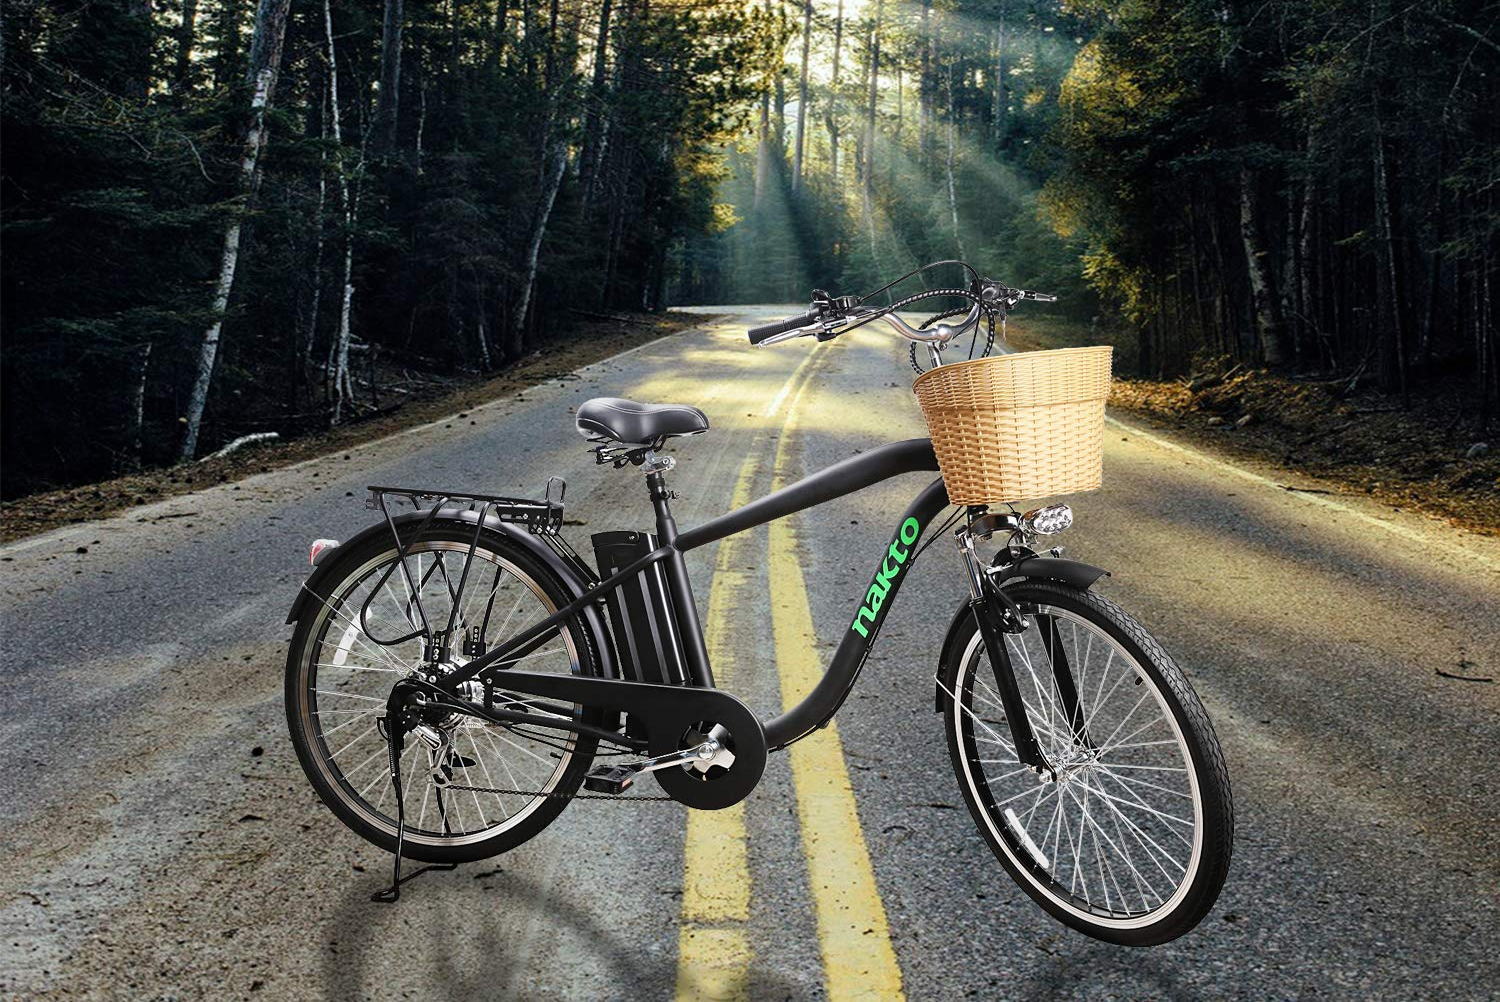 rei amazon and walmart drop prices for electric bikes labor day nakto 26 inch adult bicycle 4  1